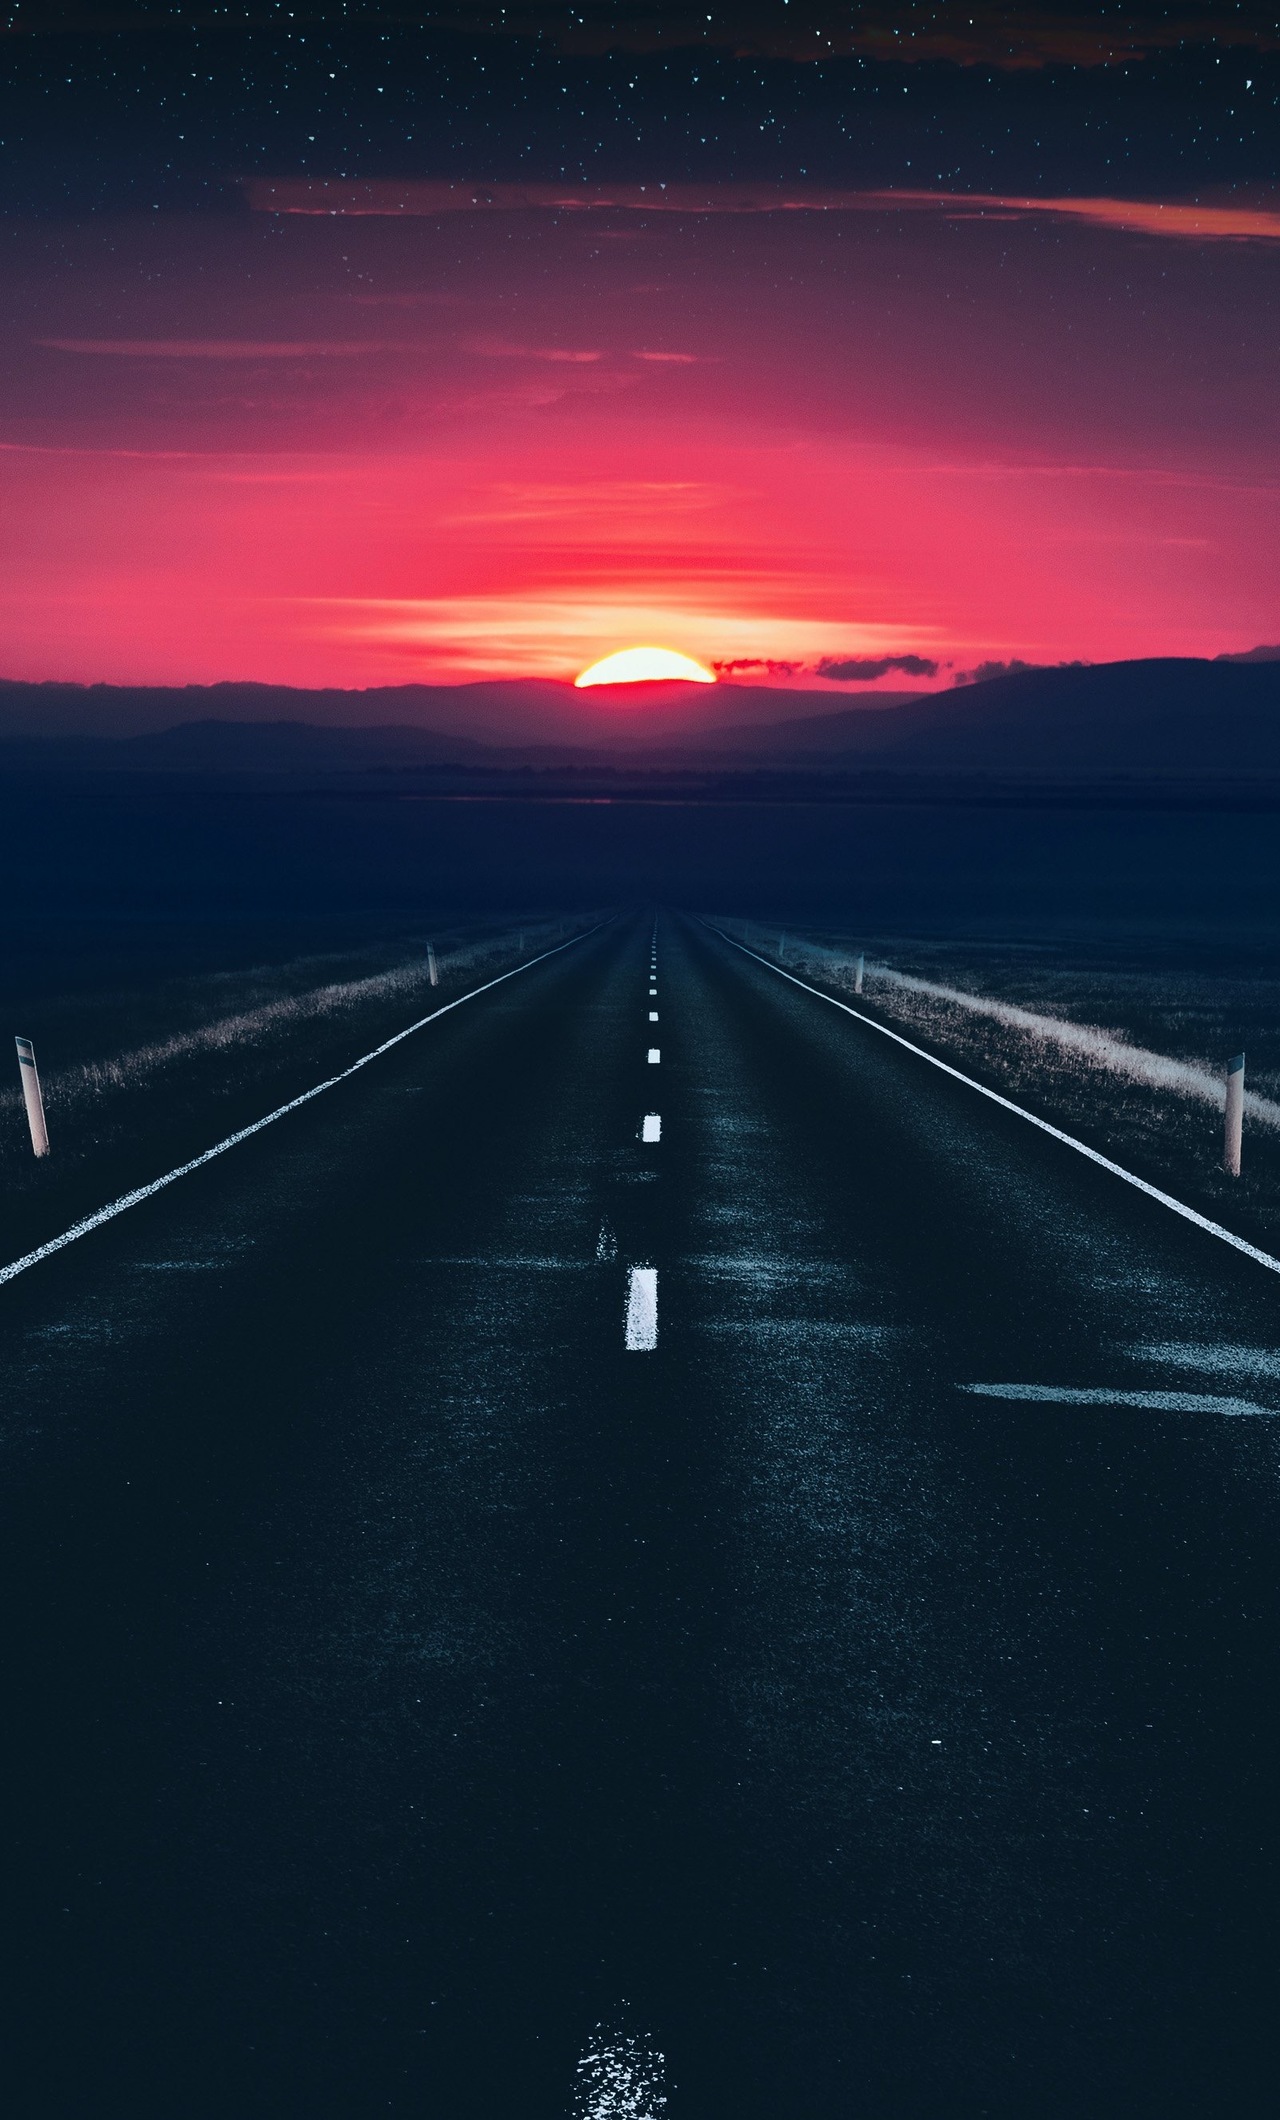 A road at sunset with a red sky - Road